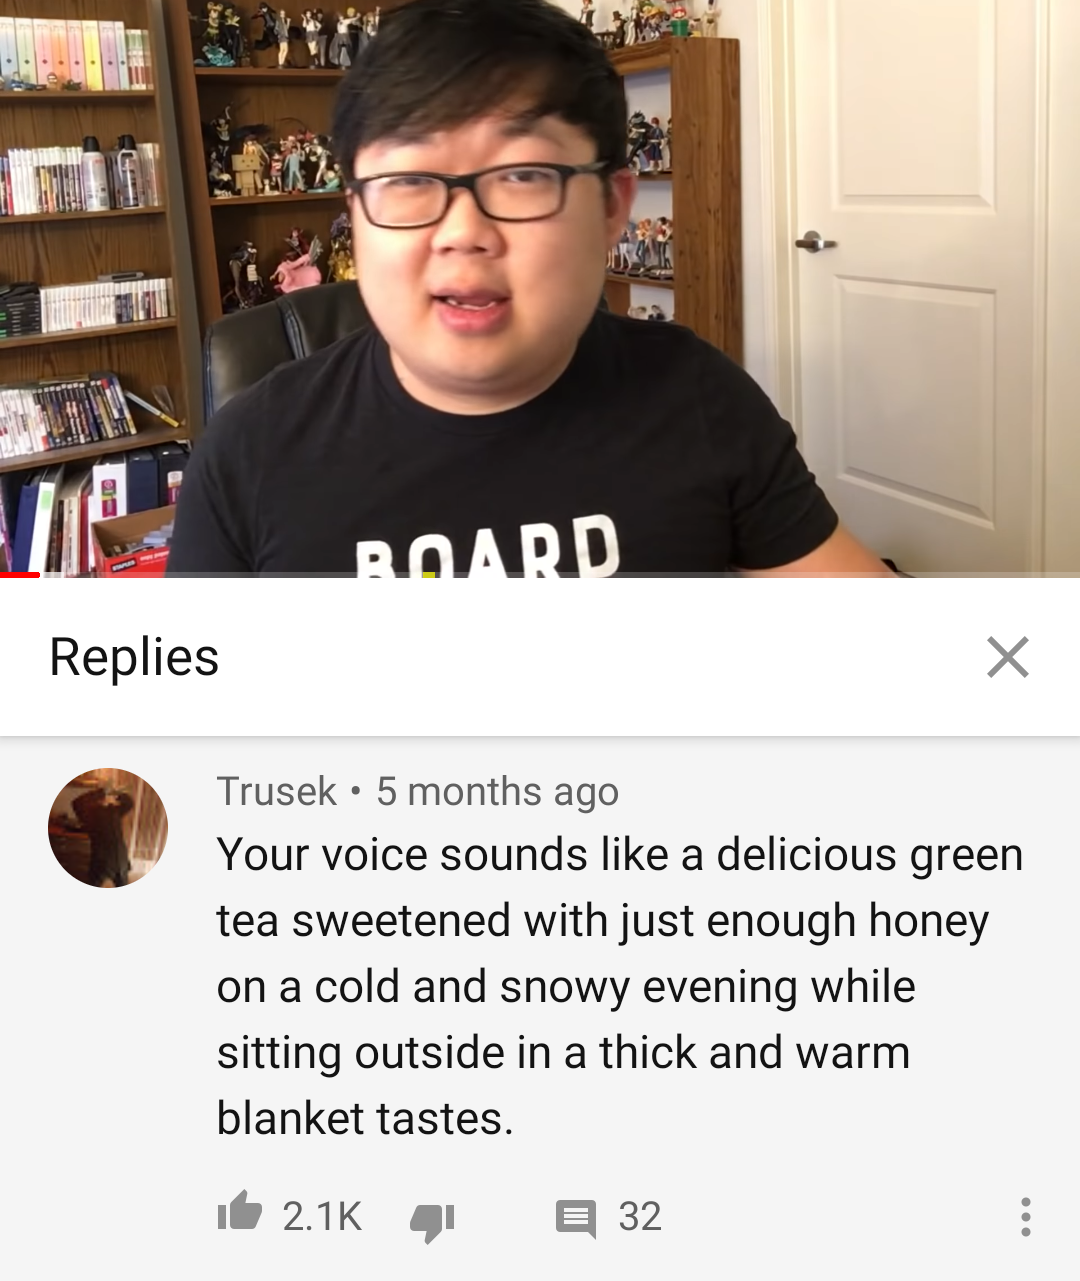 screenshot from a youtube video with a comment from user trusek that reads "your voice sounds like a delicious green tea sweetened with just enough honey on a cold and snowy evening while sitting outside in a thick and warm blanket tastes."